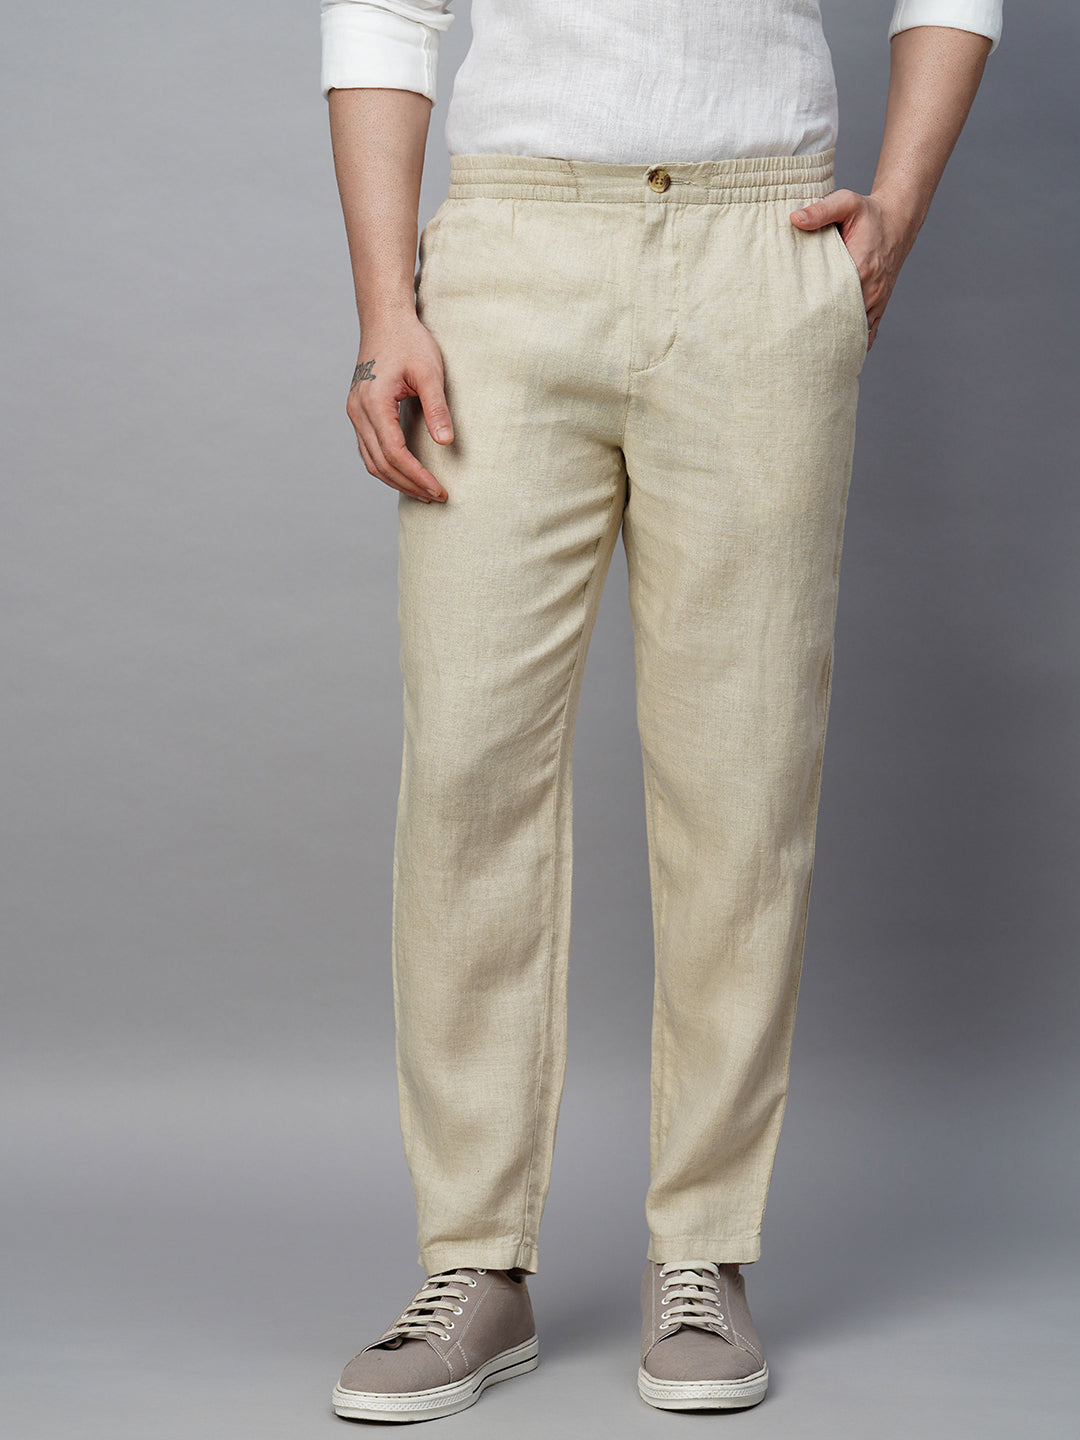 Men's Linen Natural Tapered Fit Pant